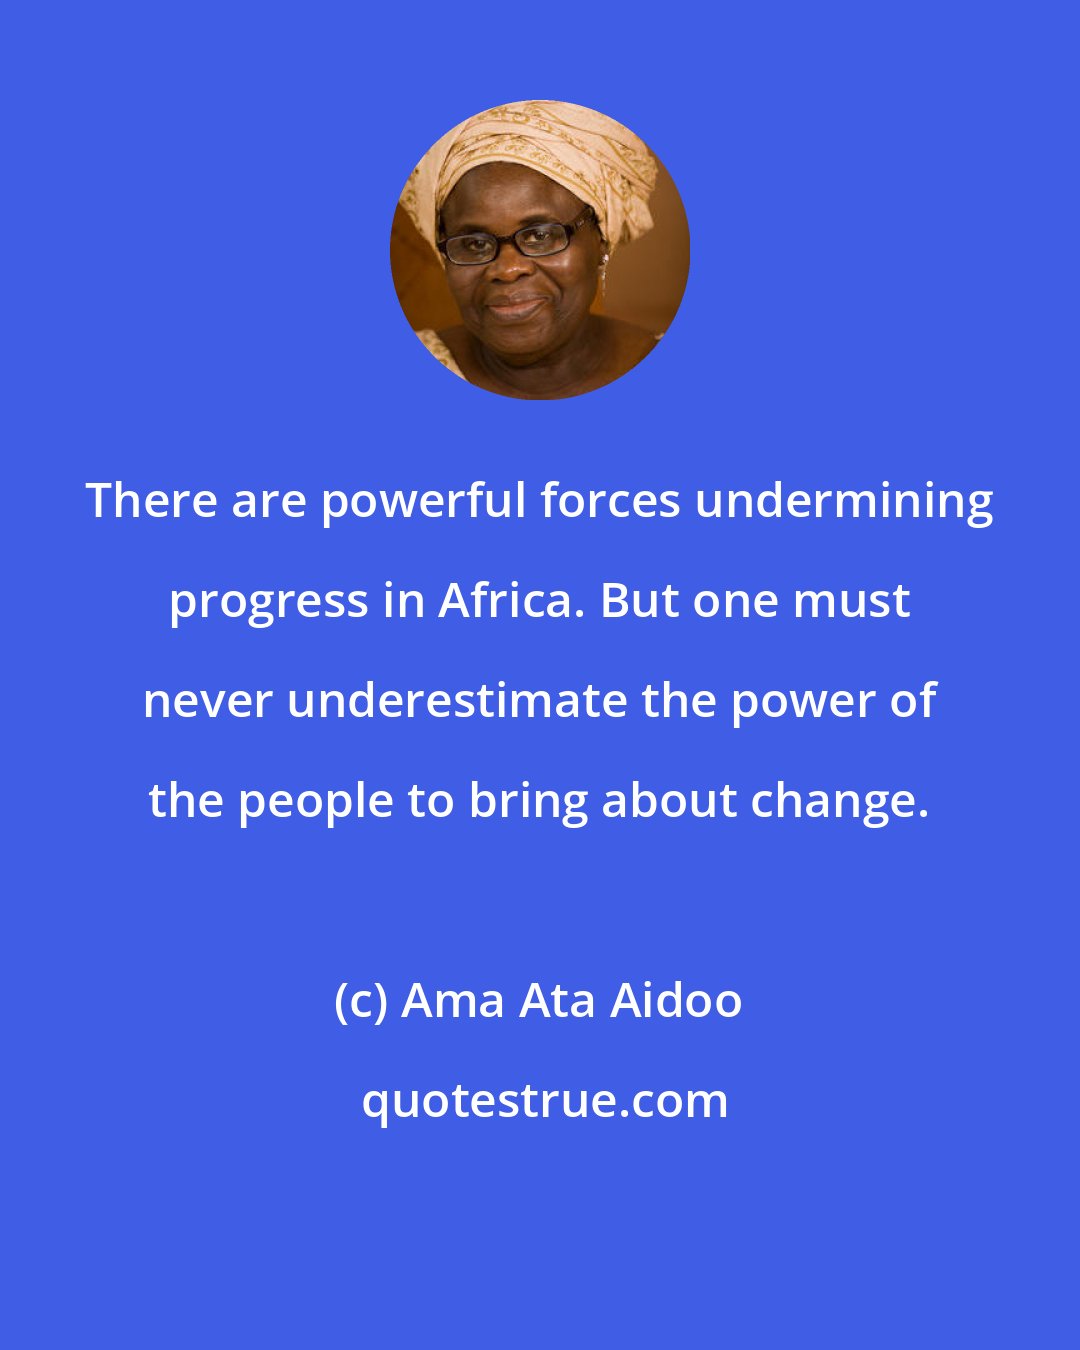 Ama Ata Aidoo: There are powerful forces undermining progress in Africa. But one must never underestimate the power of the people to bring about change.